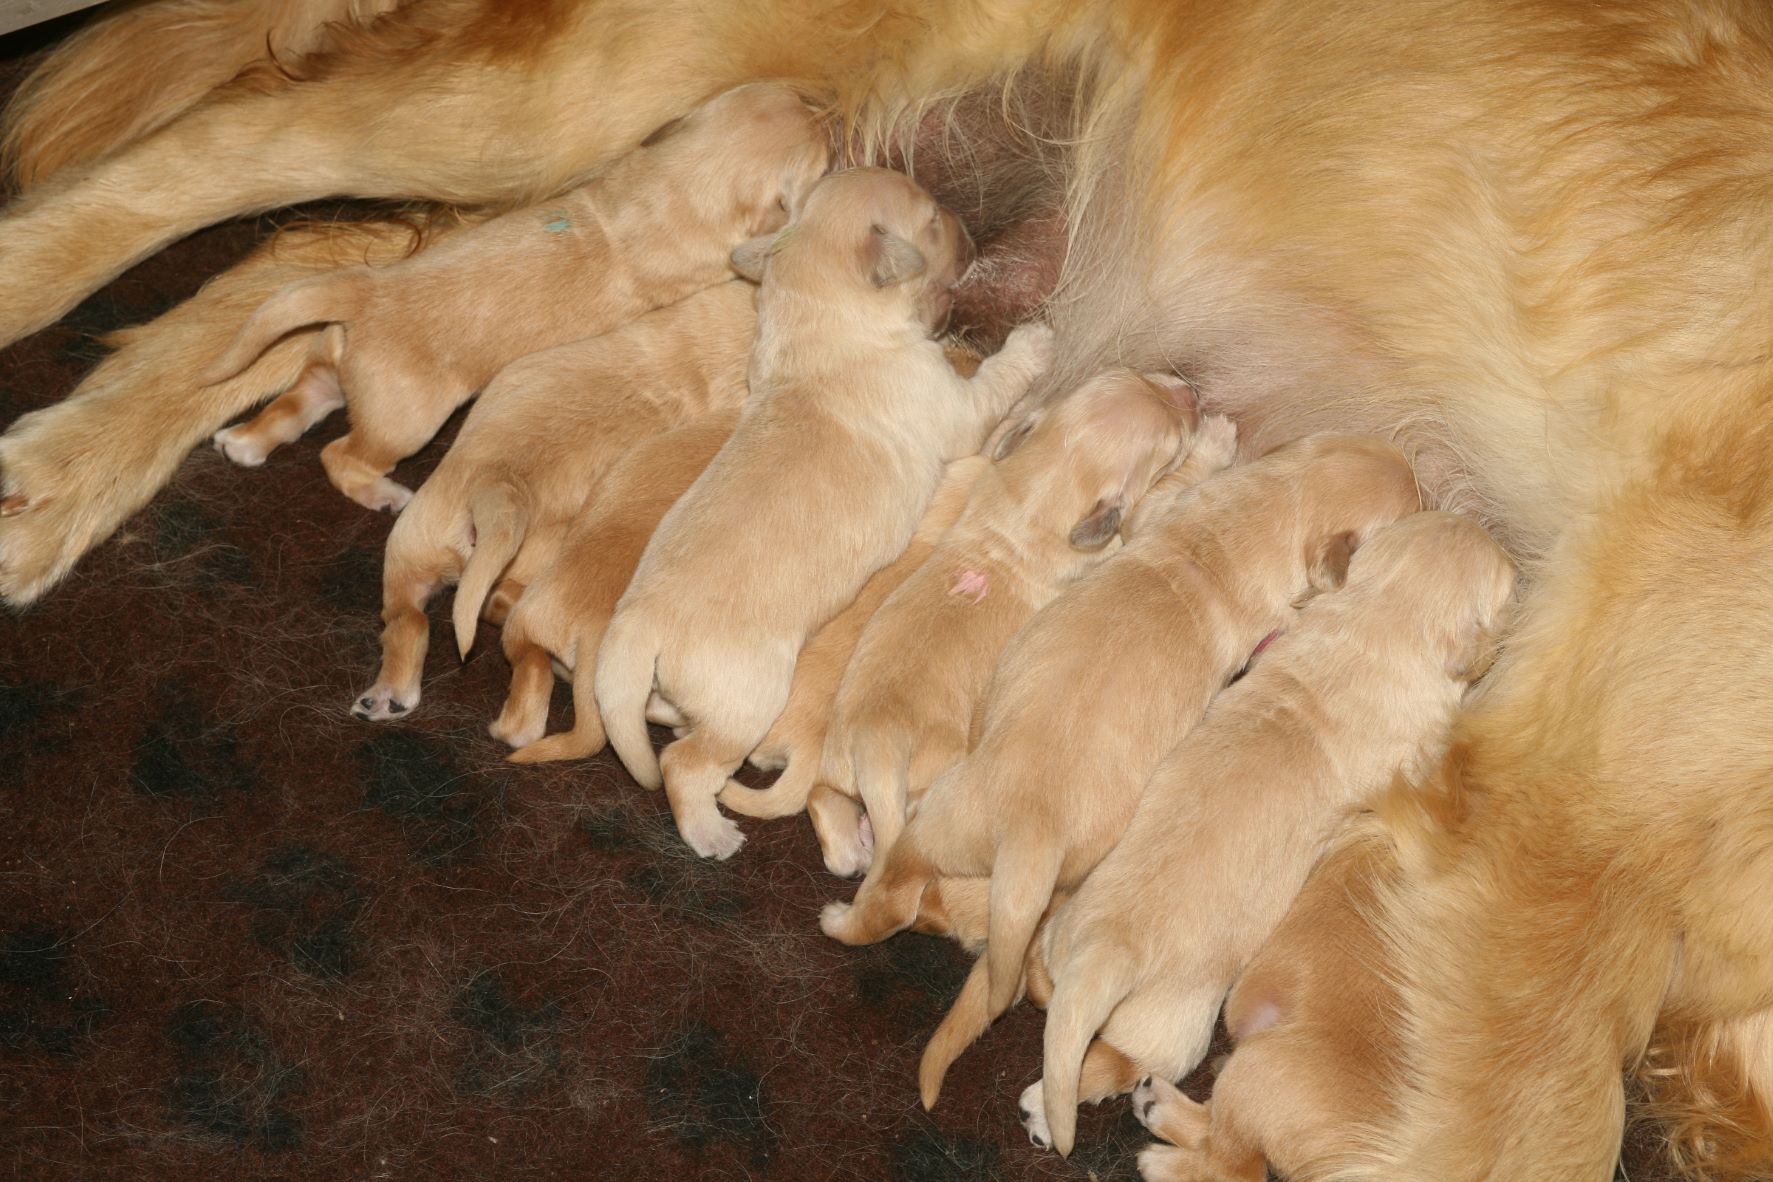 Puppies suckling at 5 days old